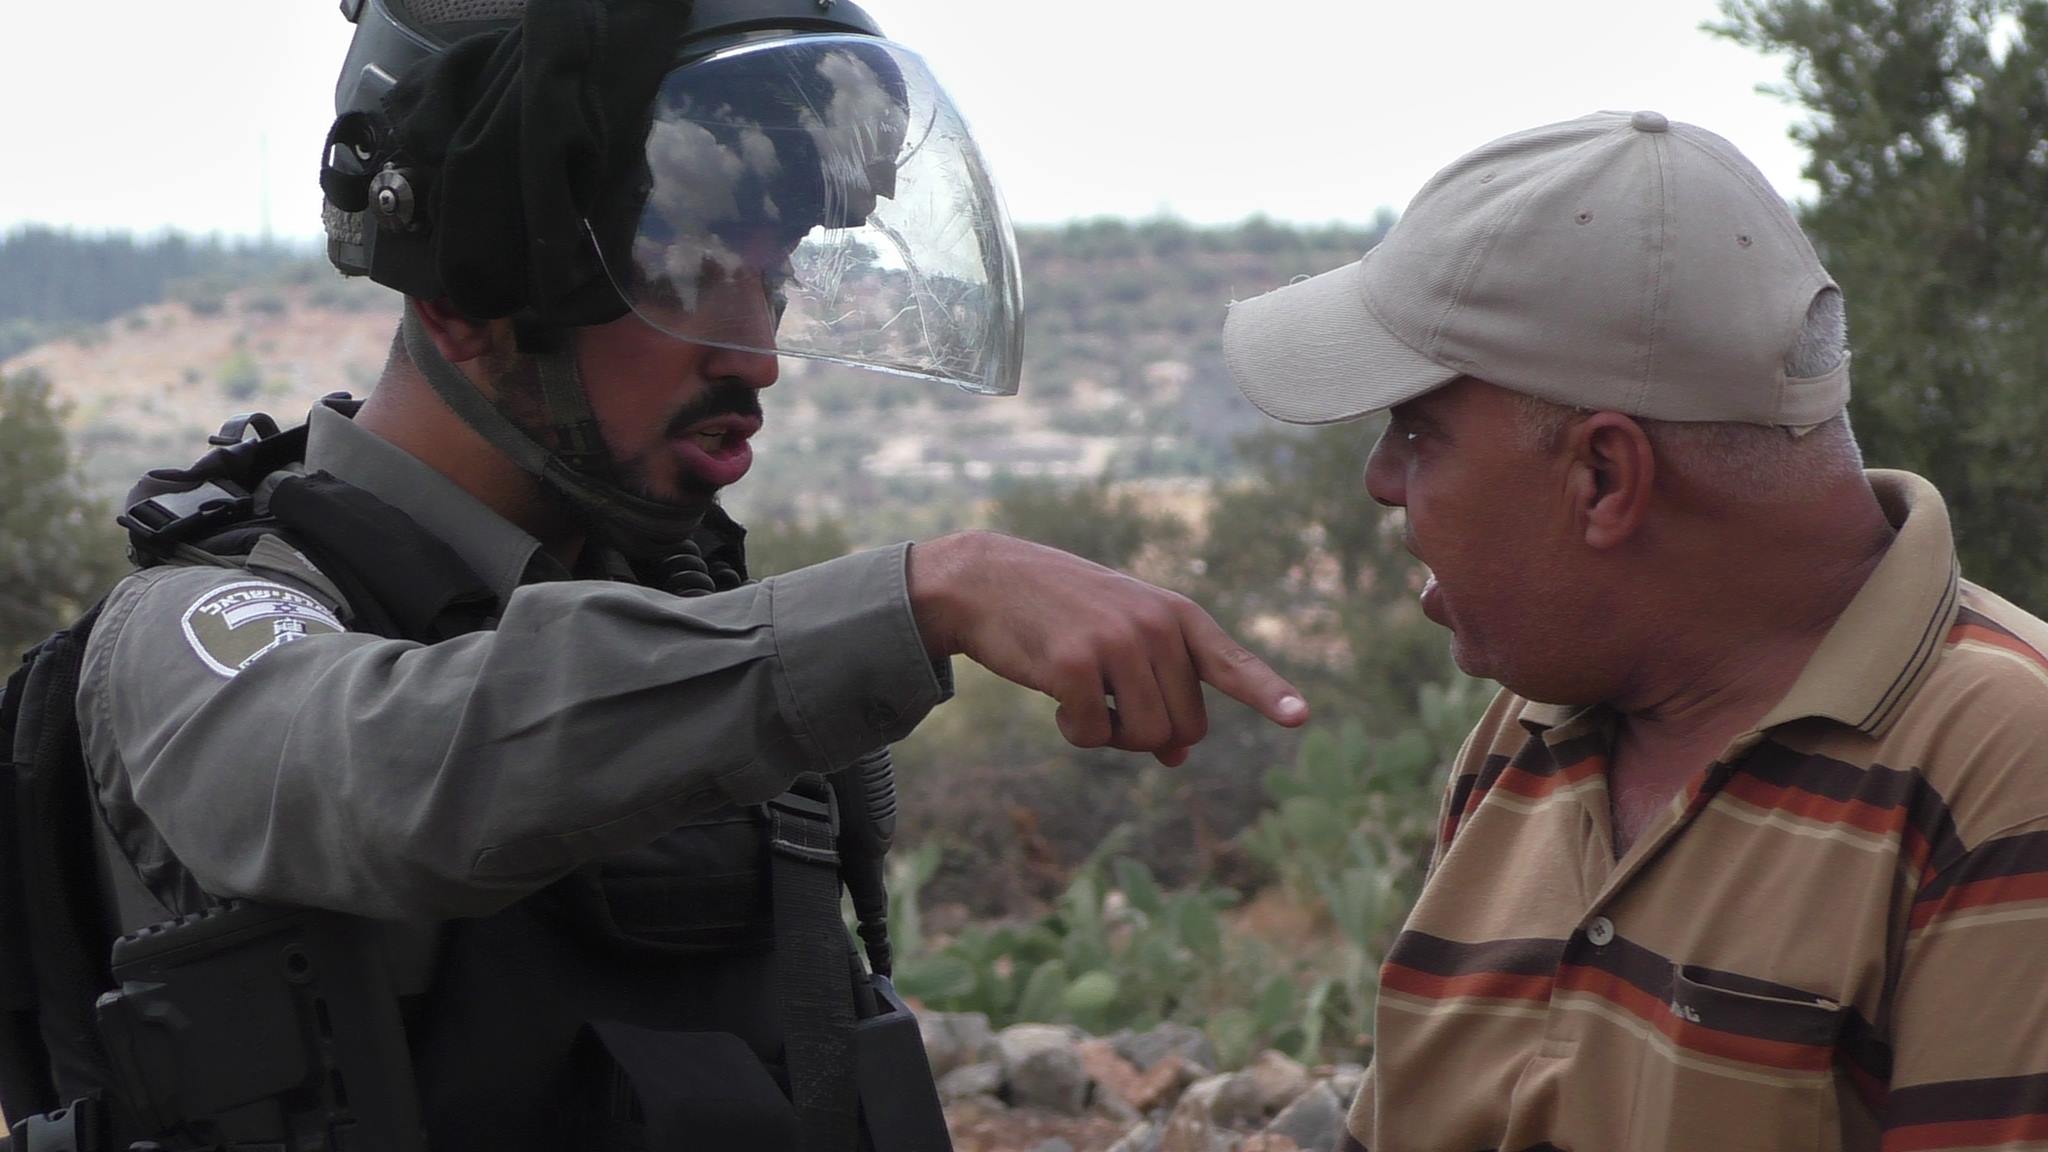 Ibrahim Amireh arguing with an Israeli soldier during the protest in west bank village of Ni'lin. photo credit: Ni'lin media center- Hassan Daboos